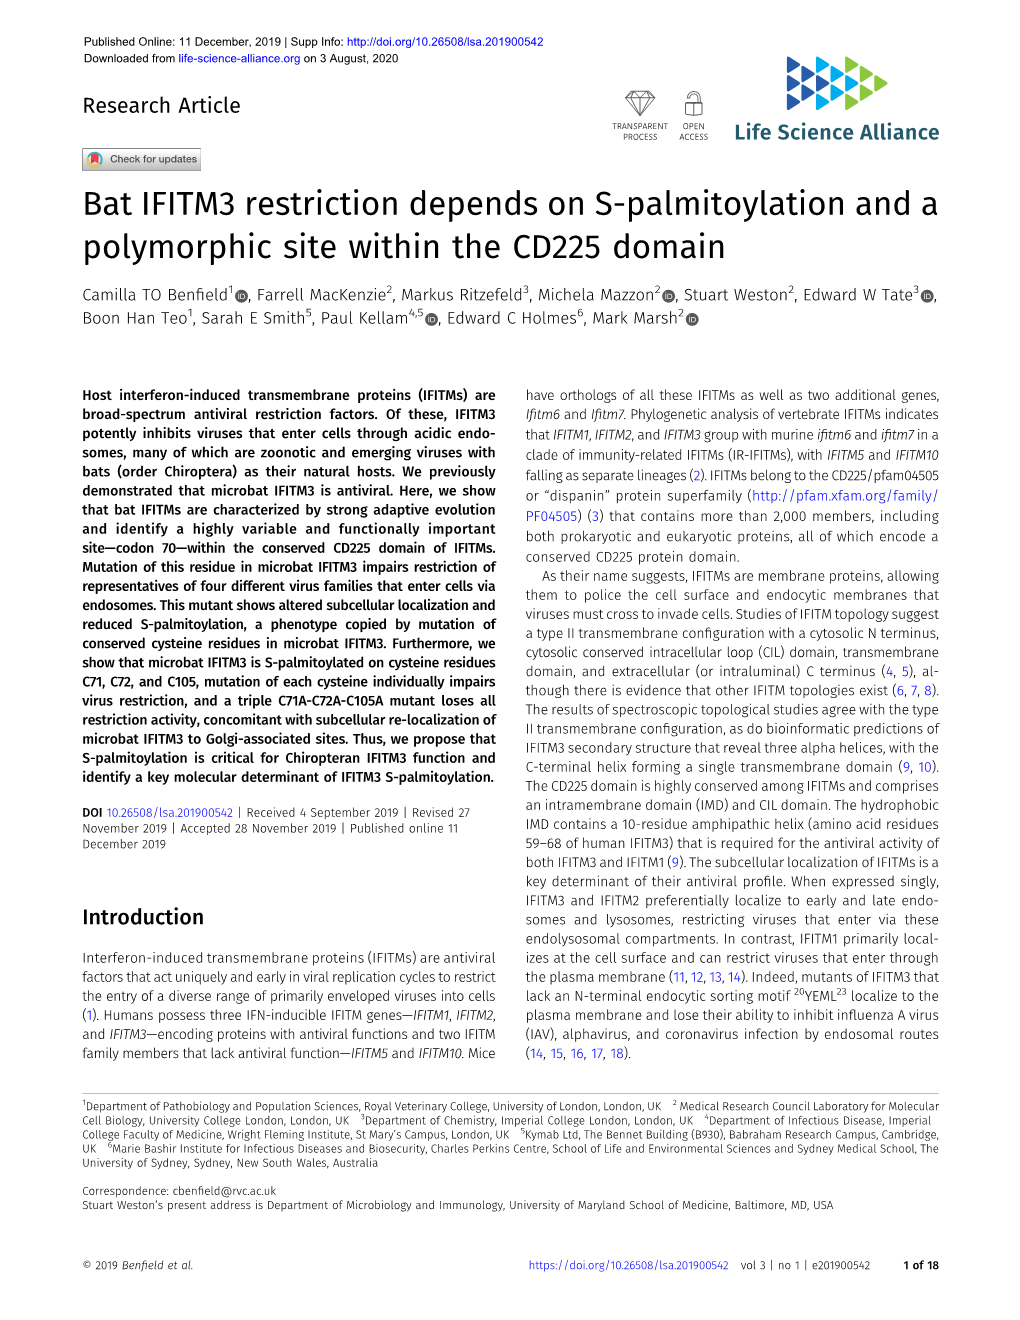 Bat IFITM3 Restriction Depends on S-Palmitoylation and a Polymorphic Site Within the CD225 Domain